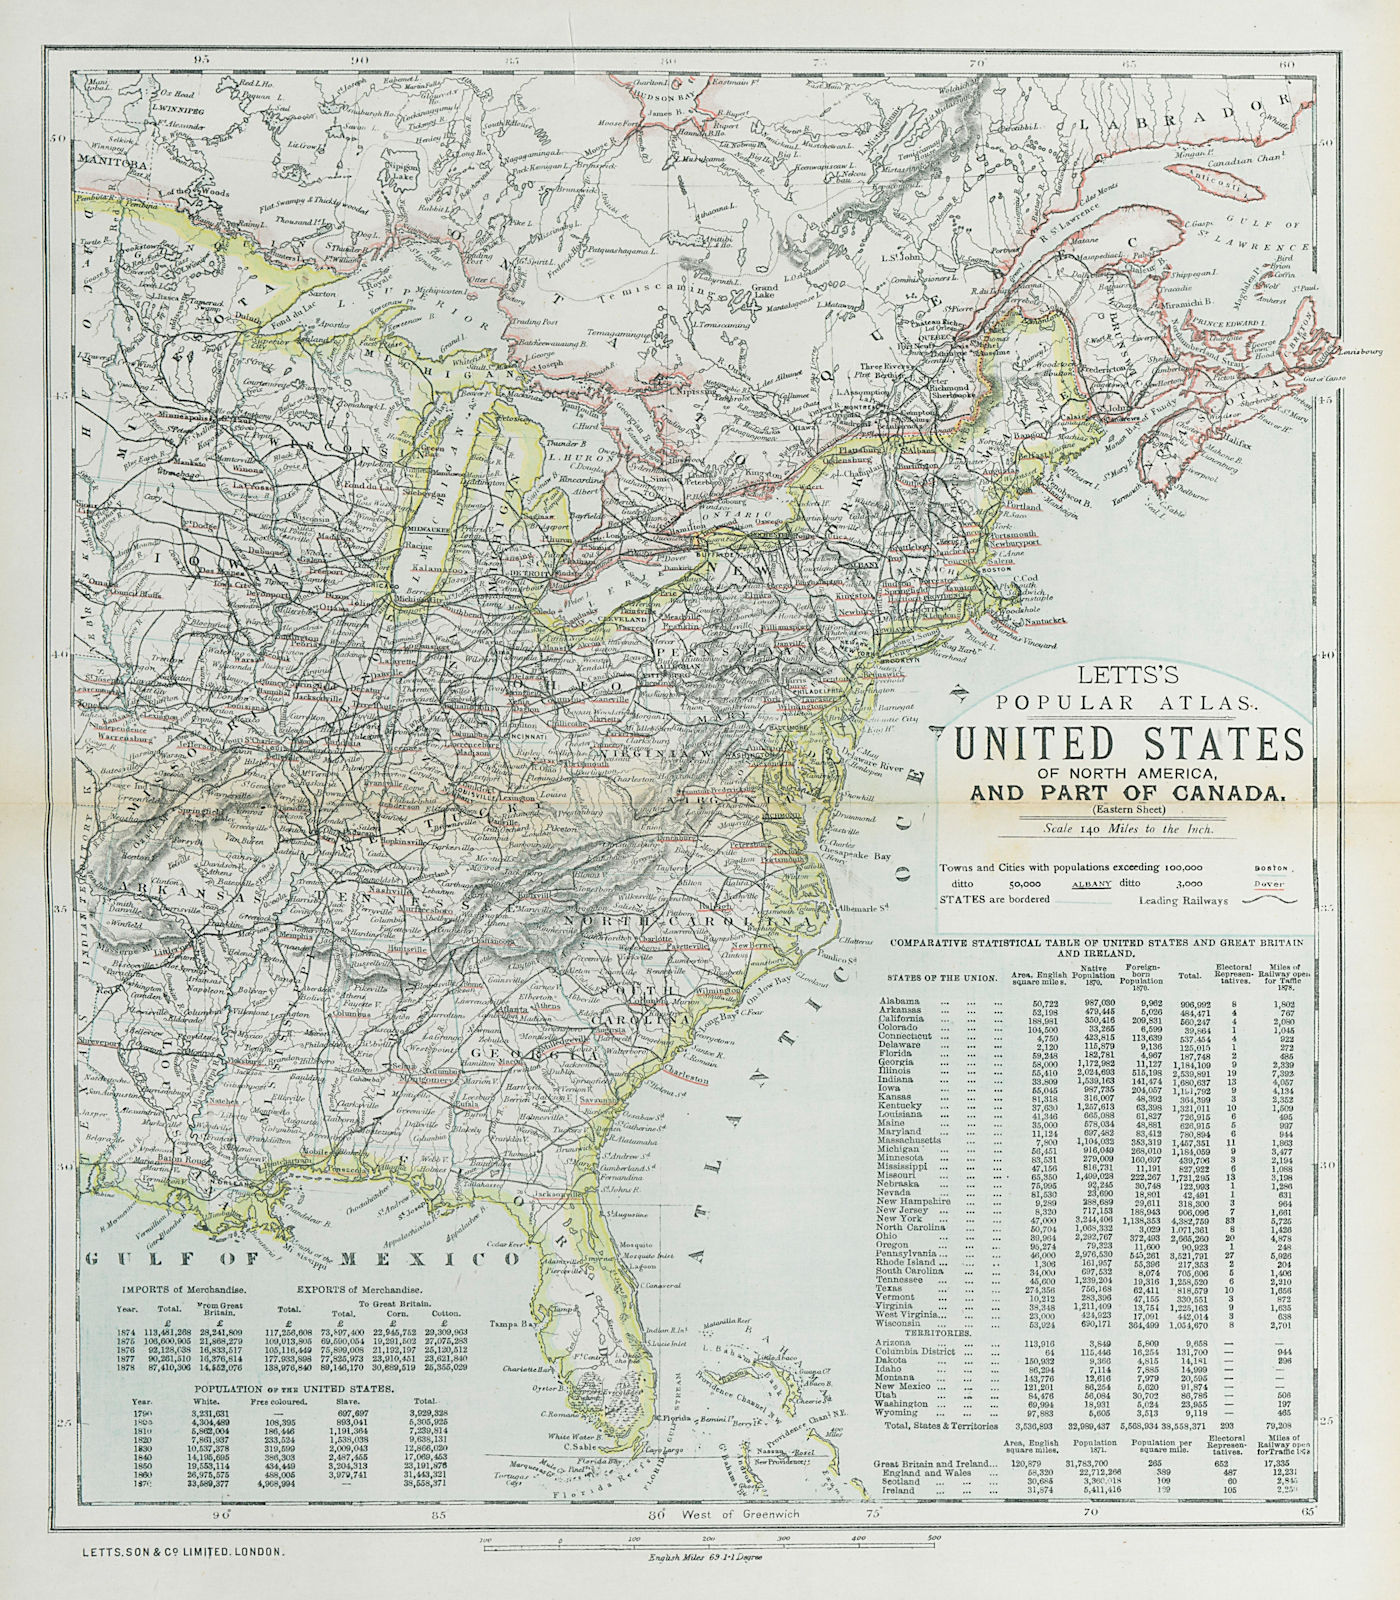 Associate Product EASTERN UNITED STATES. Railroads. Population table. LETTS 1883 old antique map